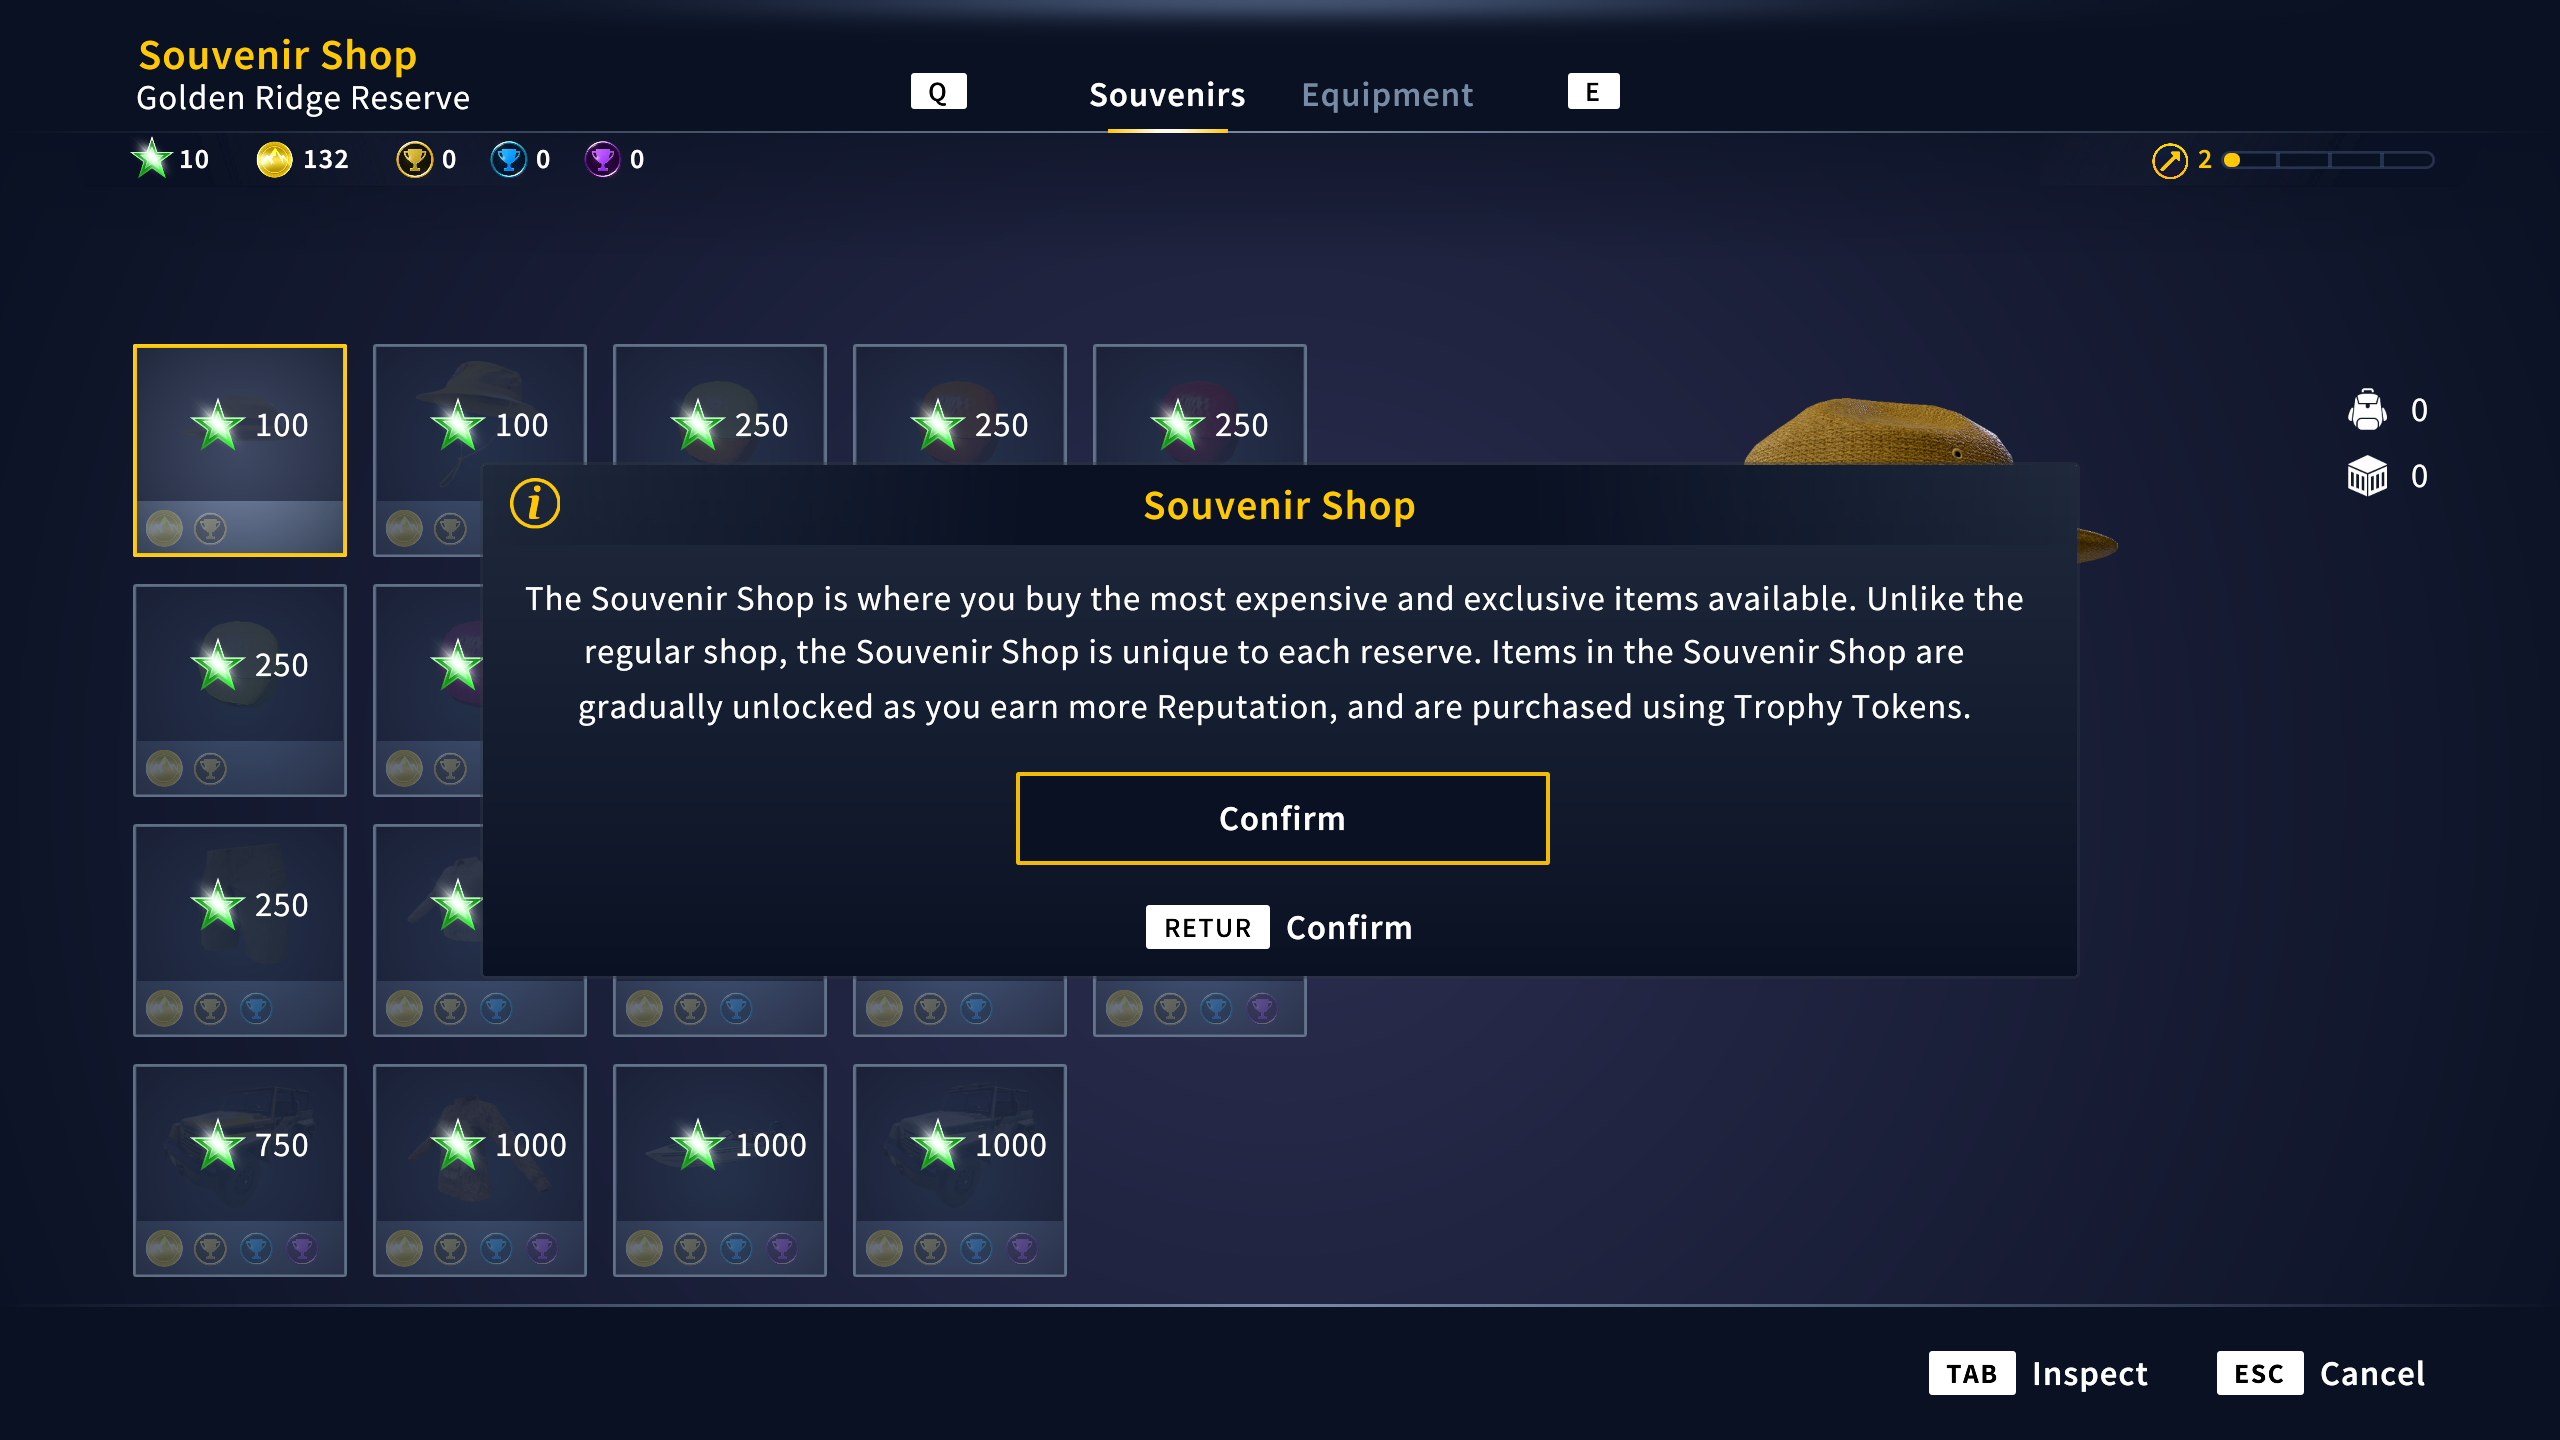 A screenshot showcasing the Souvenir Shop system and menu after the Evolution Update release.